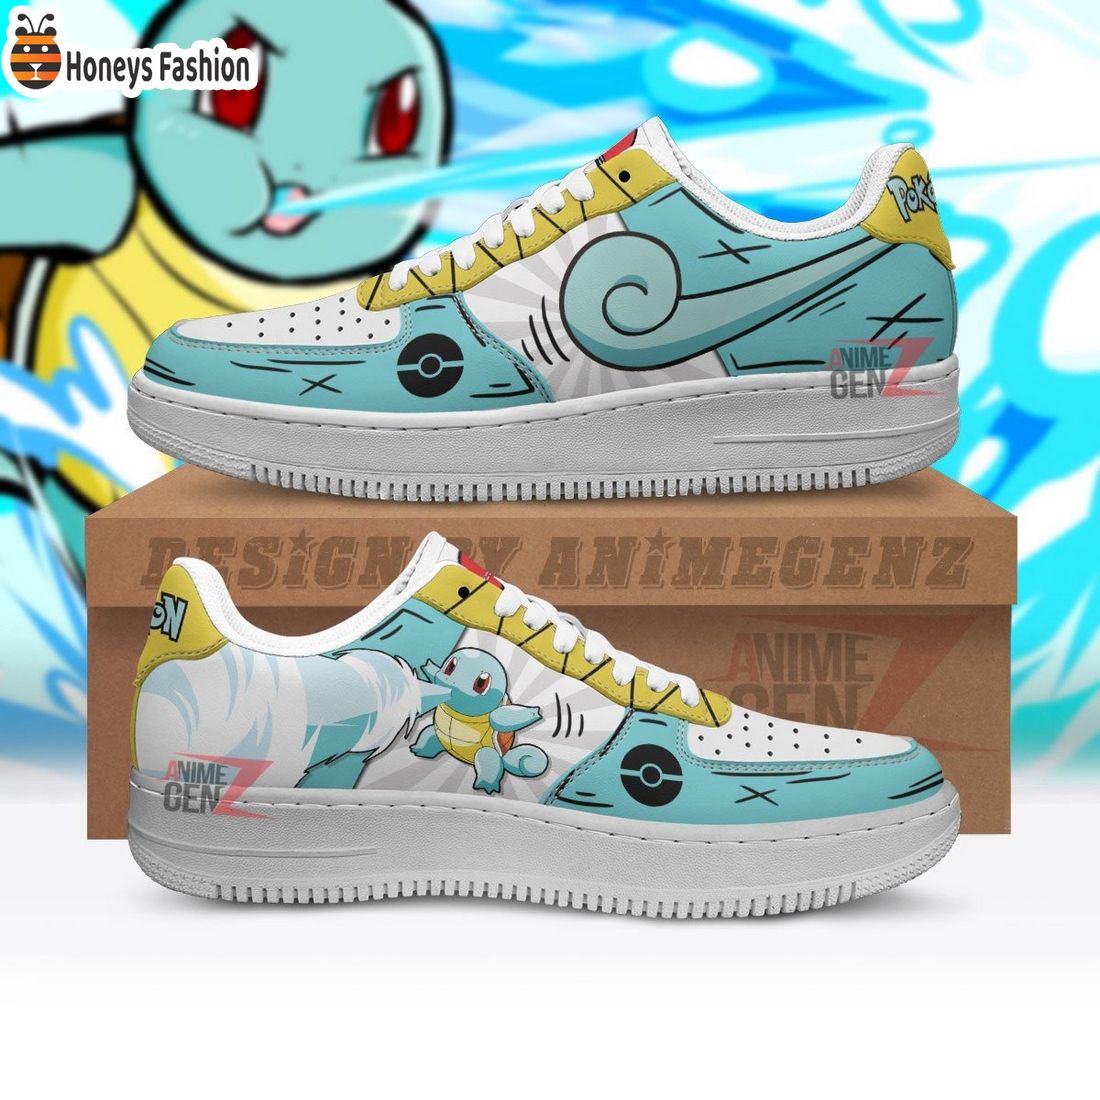 Pokemon Squirtle Air Force 1 Sneakers